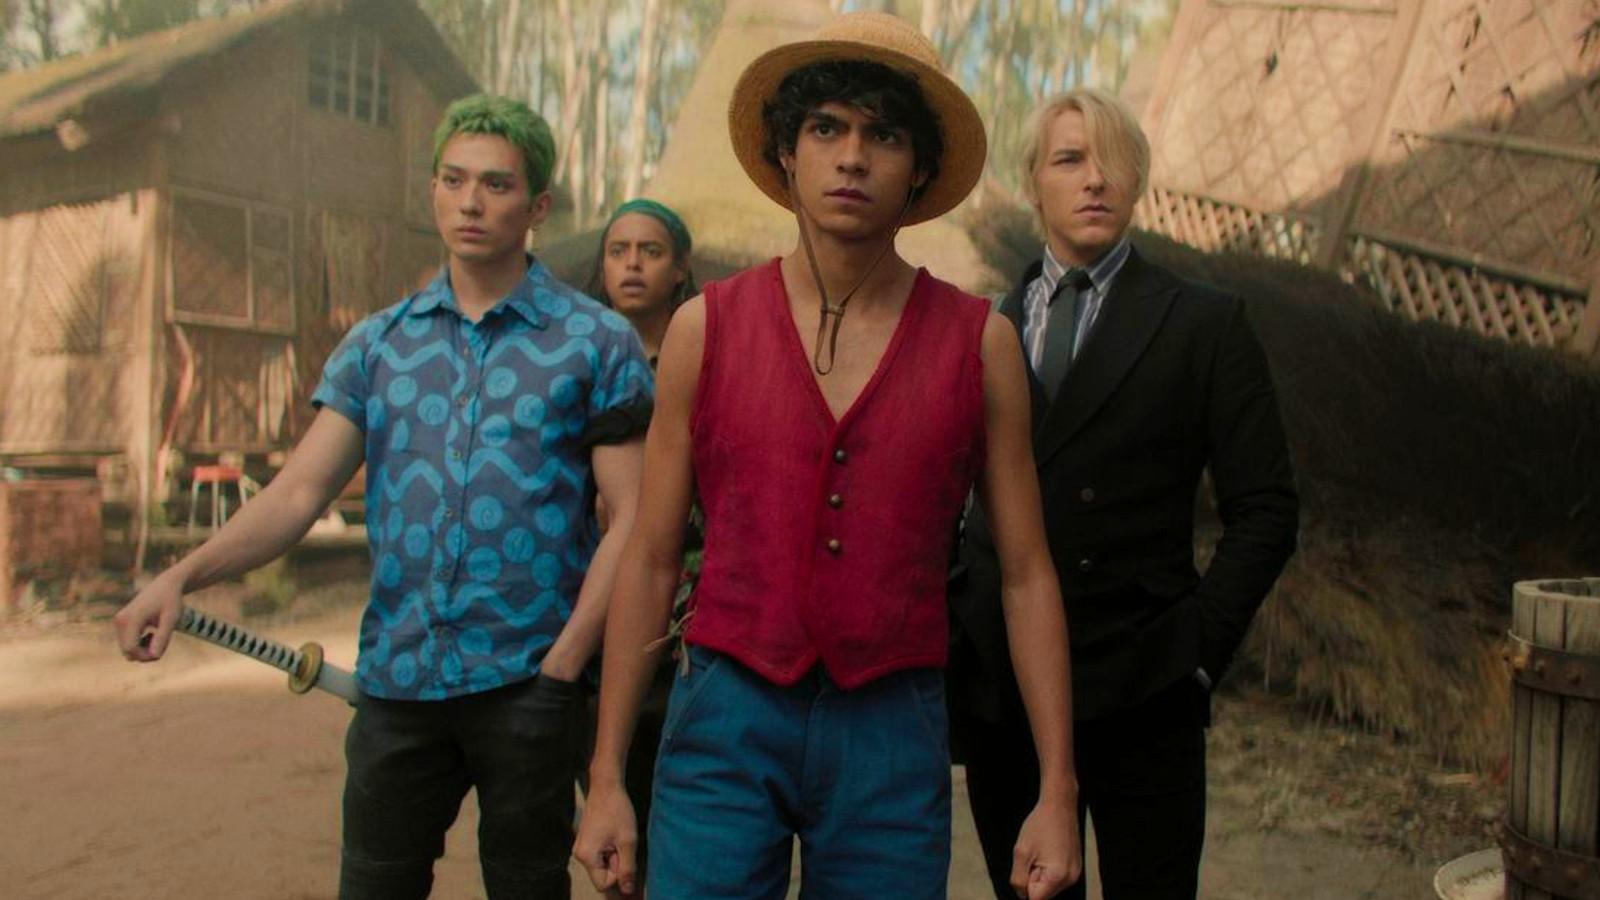 The live-action cast of One Piece on Netflix